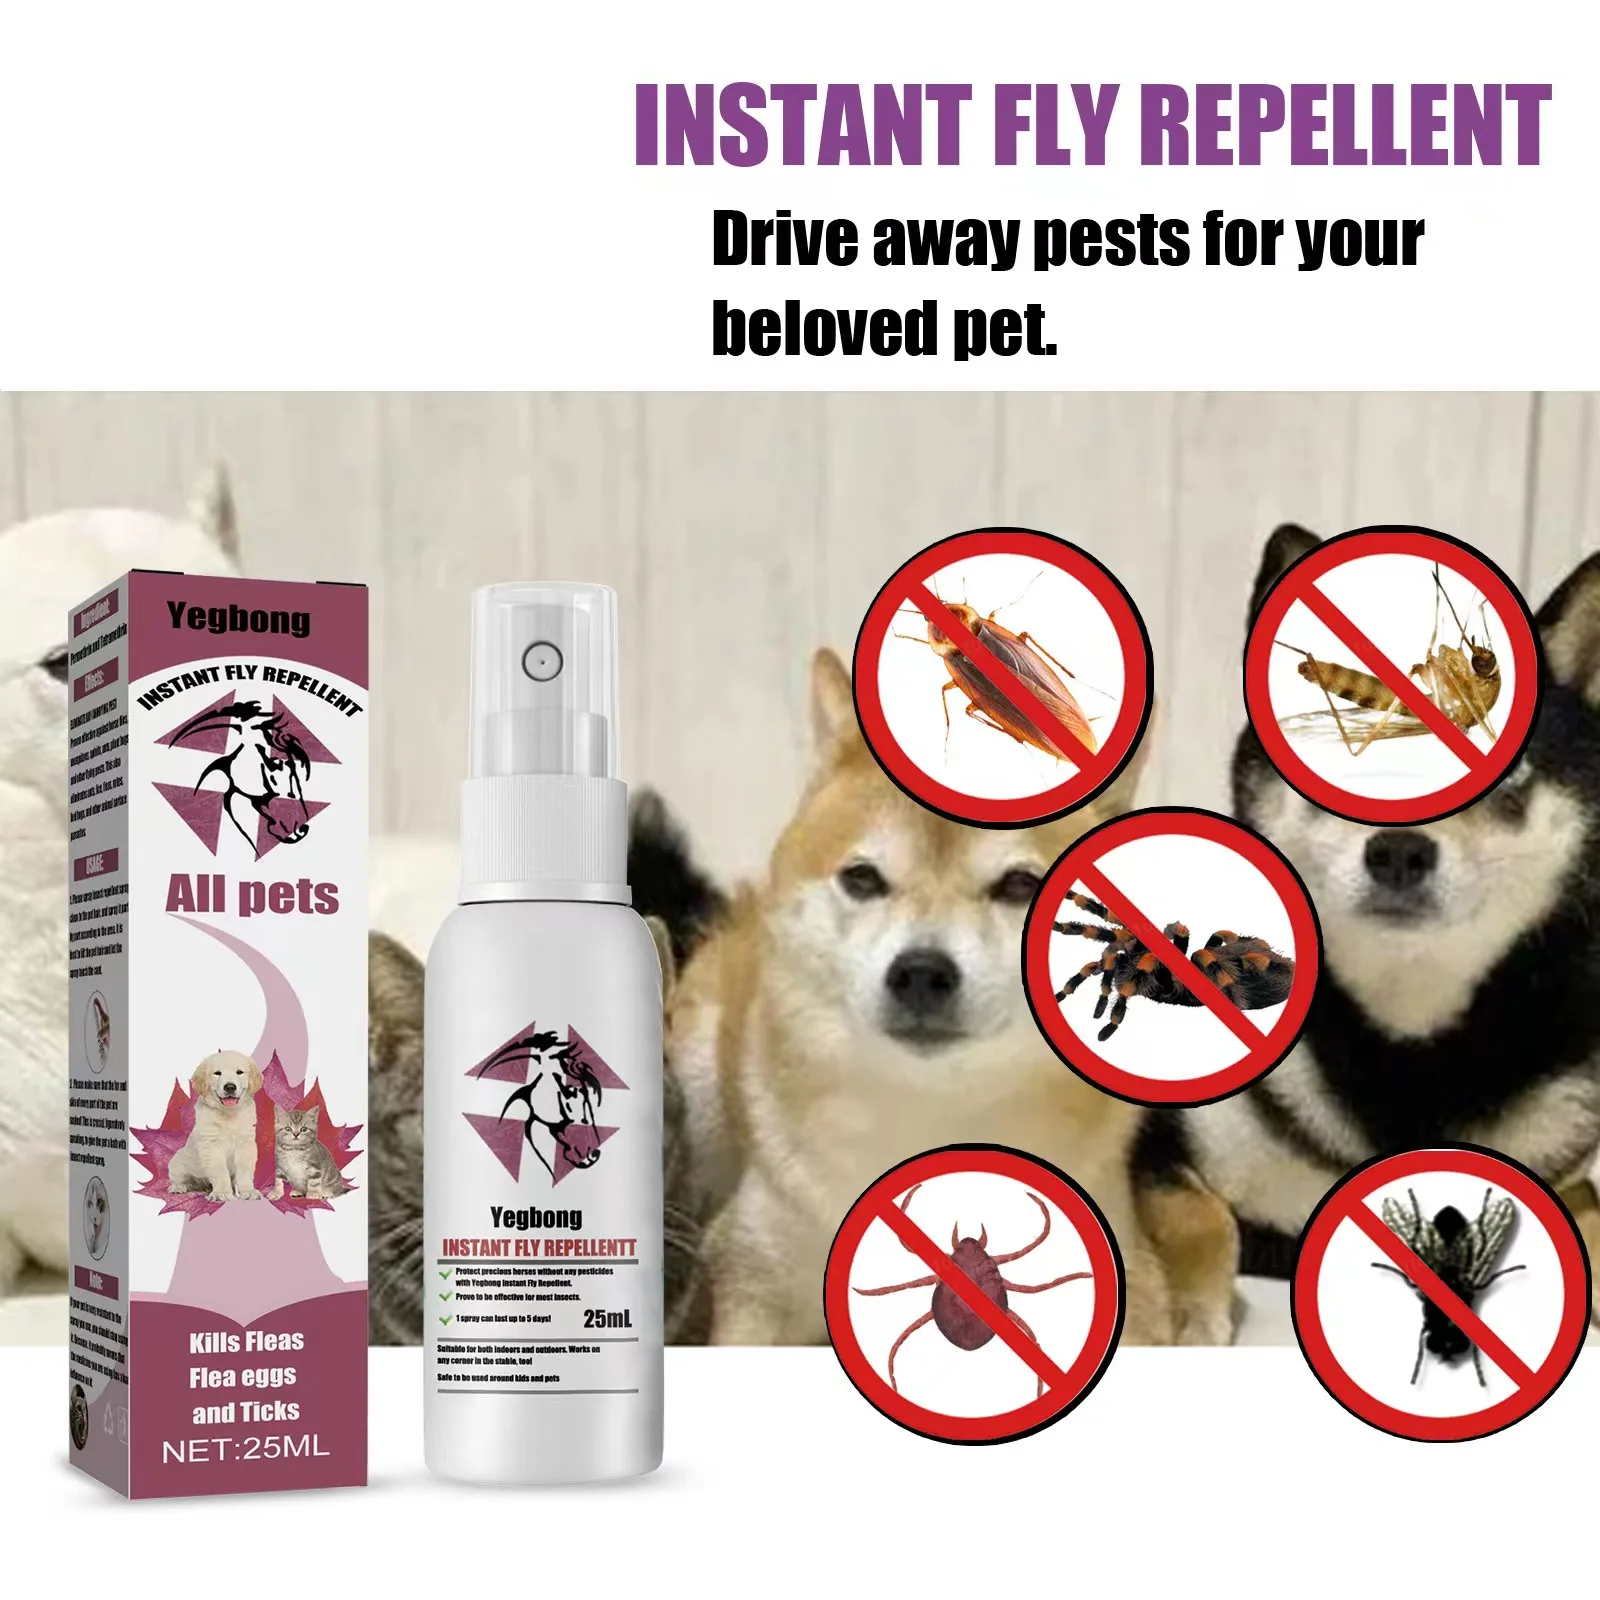 

Pet insect repellent spray Drive away fleas lice ticks Sterilization Relieve skin itching Suitable for deworming cats and dogs